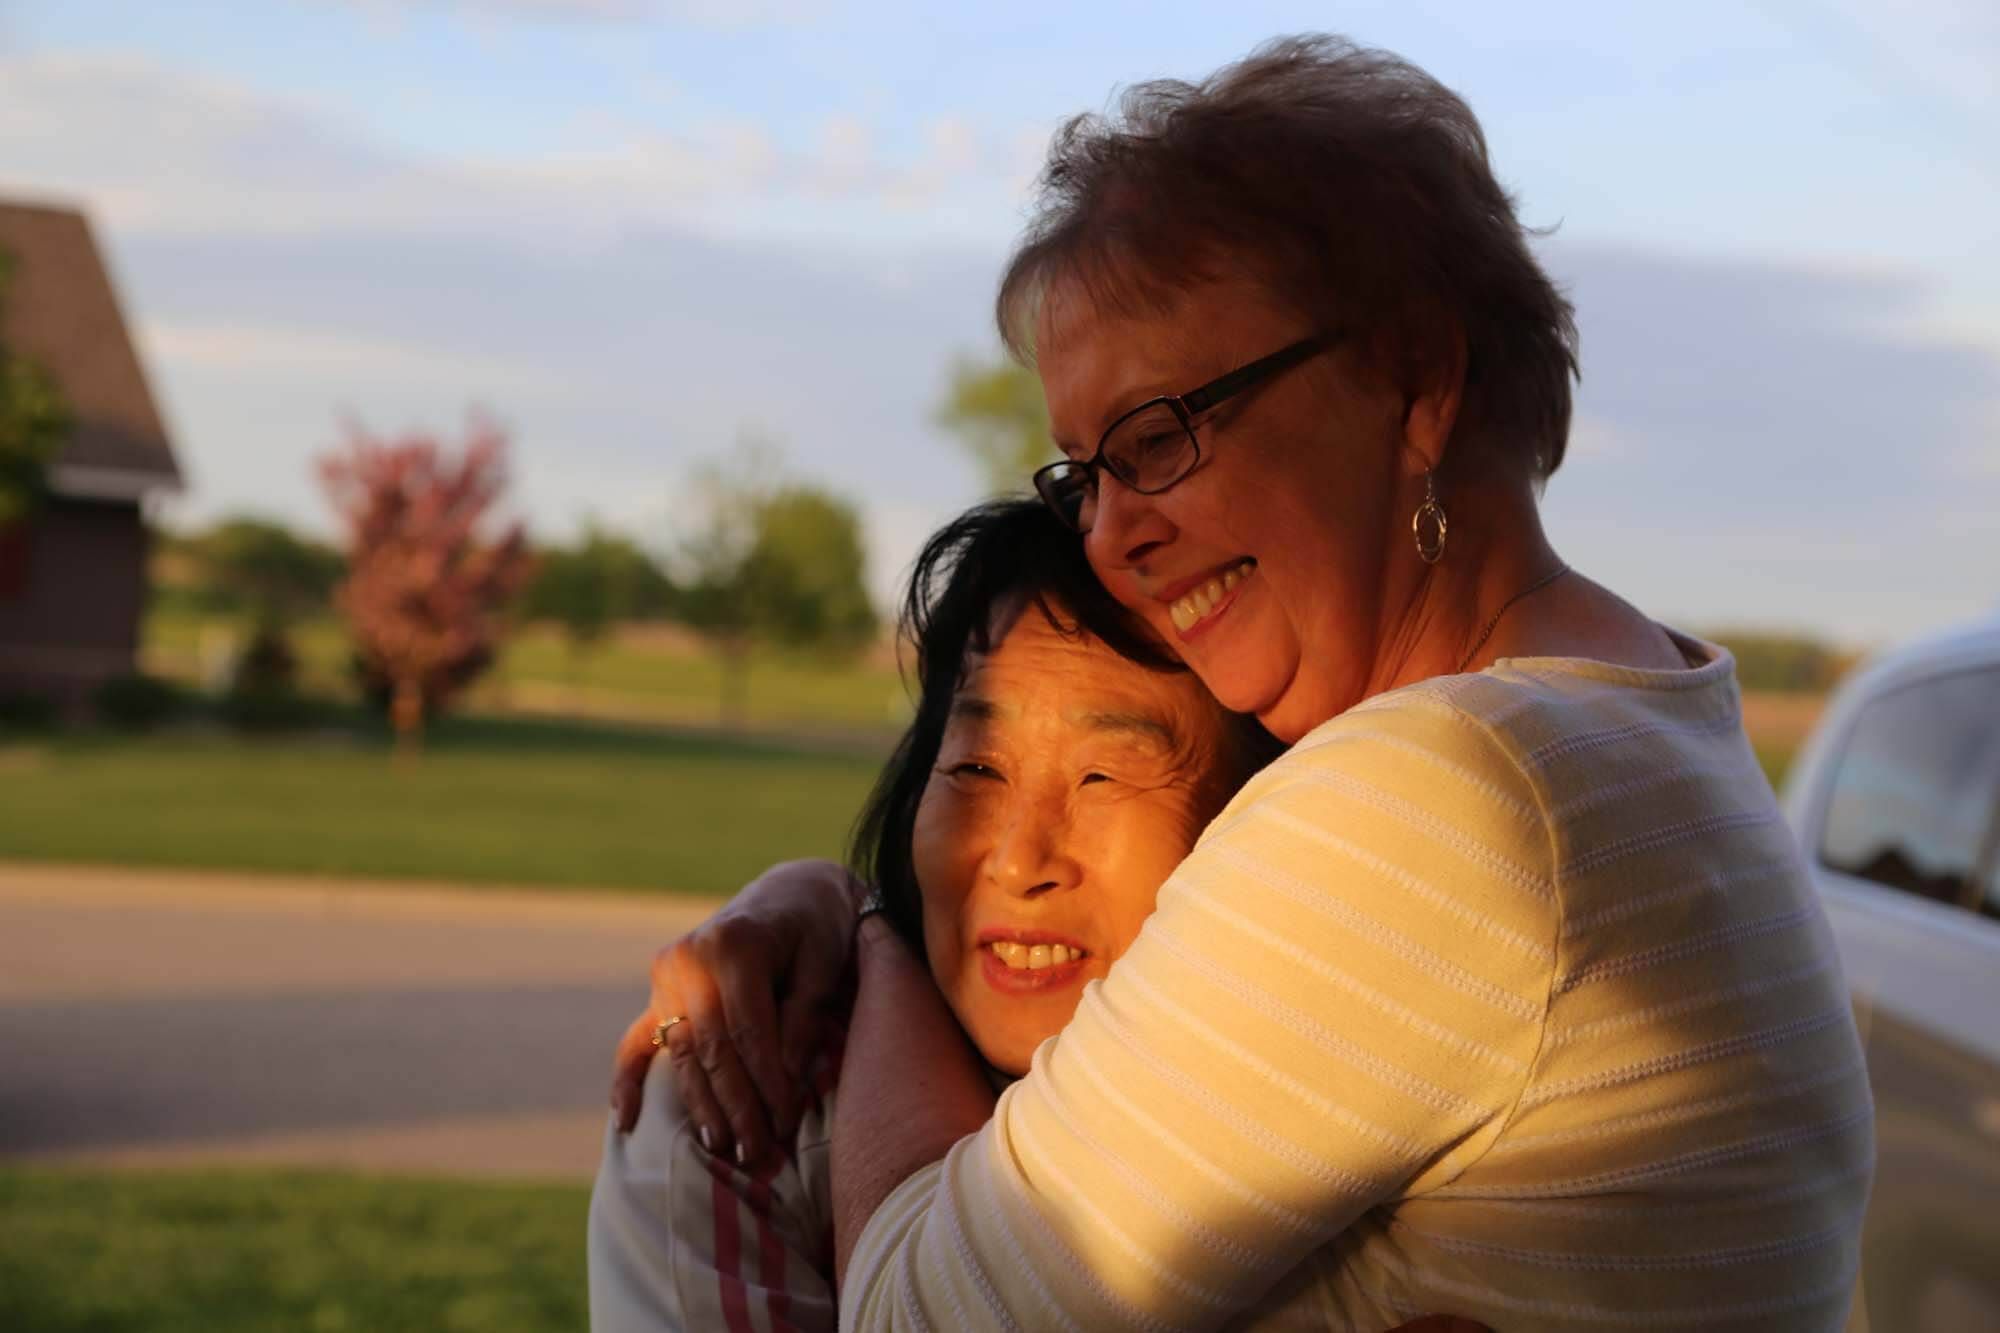 Sook-nyeon Kim, 71, and Lois Fostervold, 75, embrace after meeting for the first time in Willmar, Minnesota.